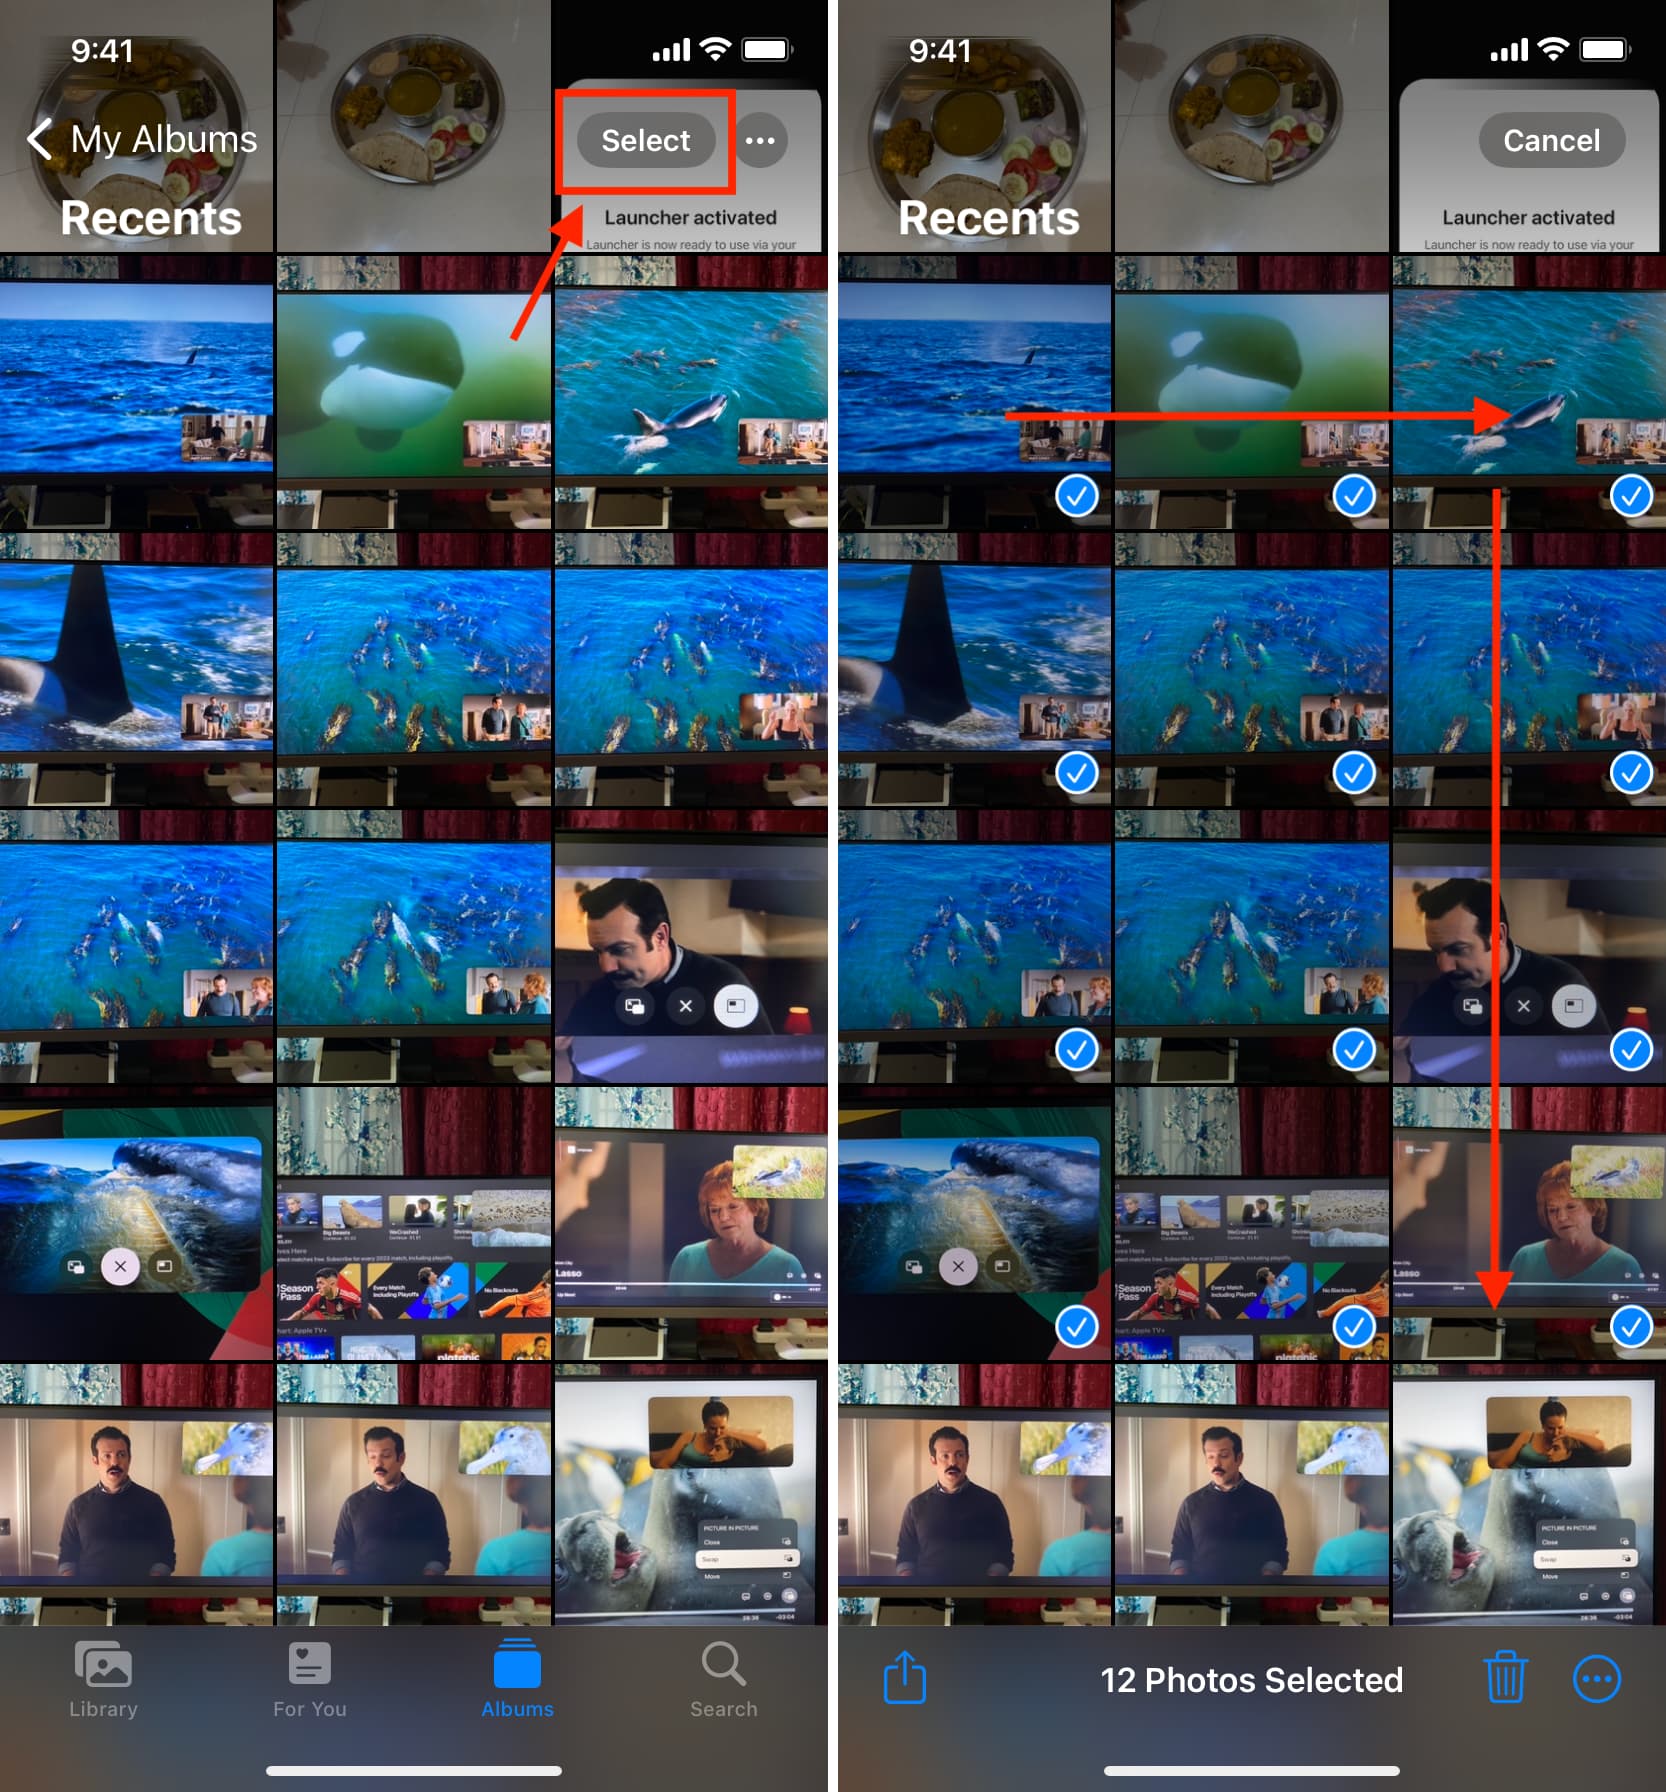 Run your finger to select many photos at once on your iPhone